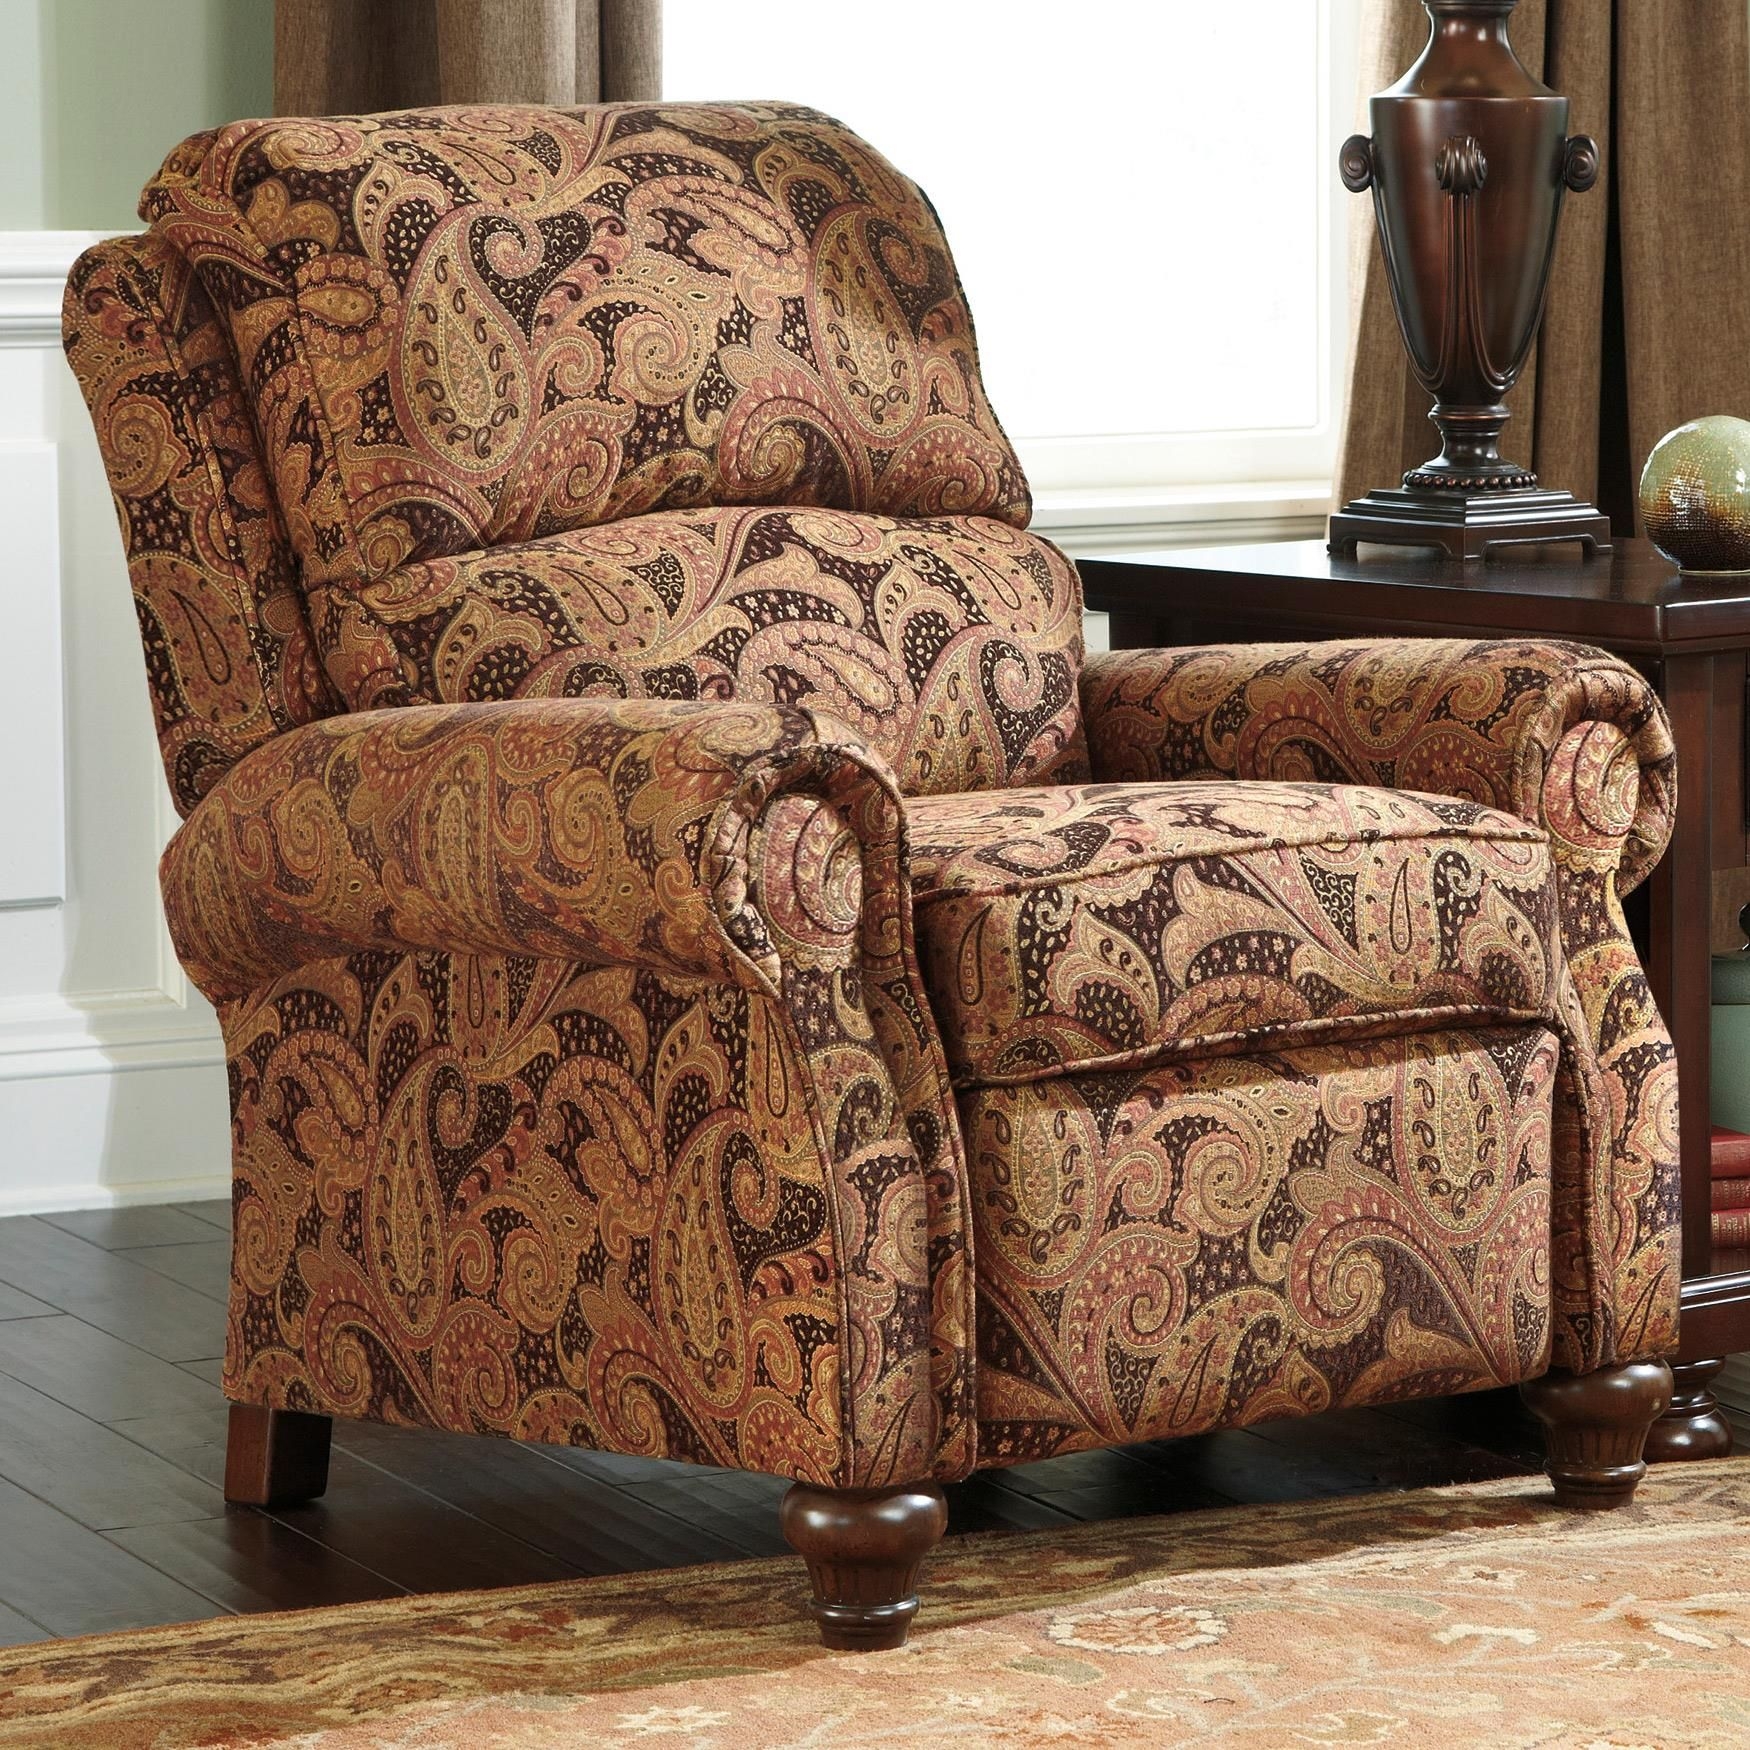 Traditional style upholstery features top grain leather plush rolled